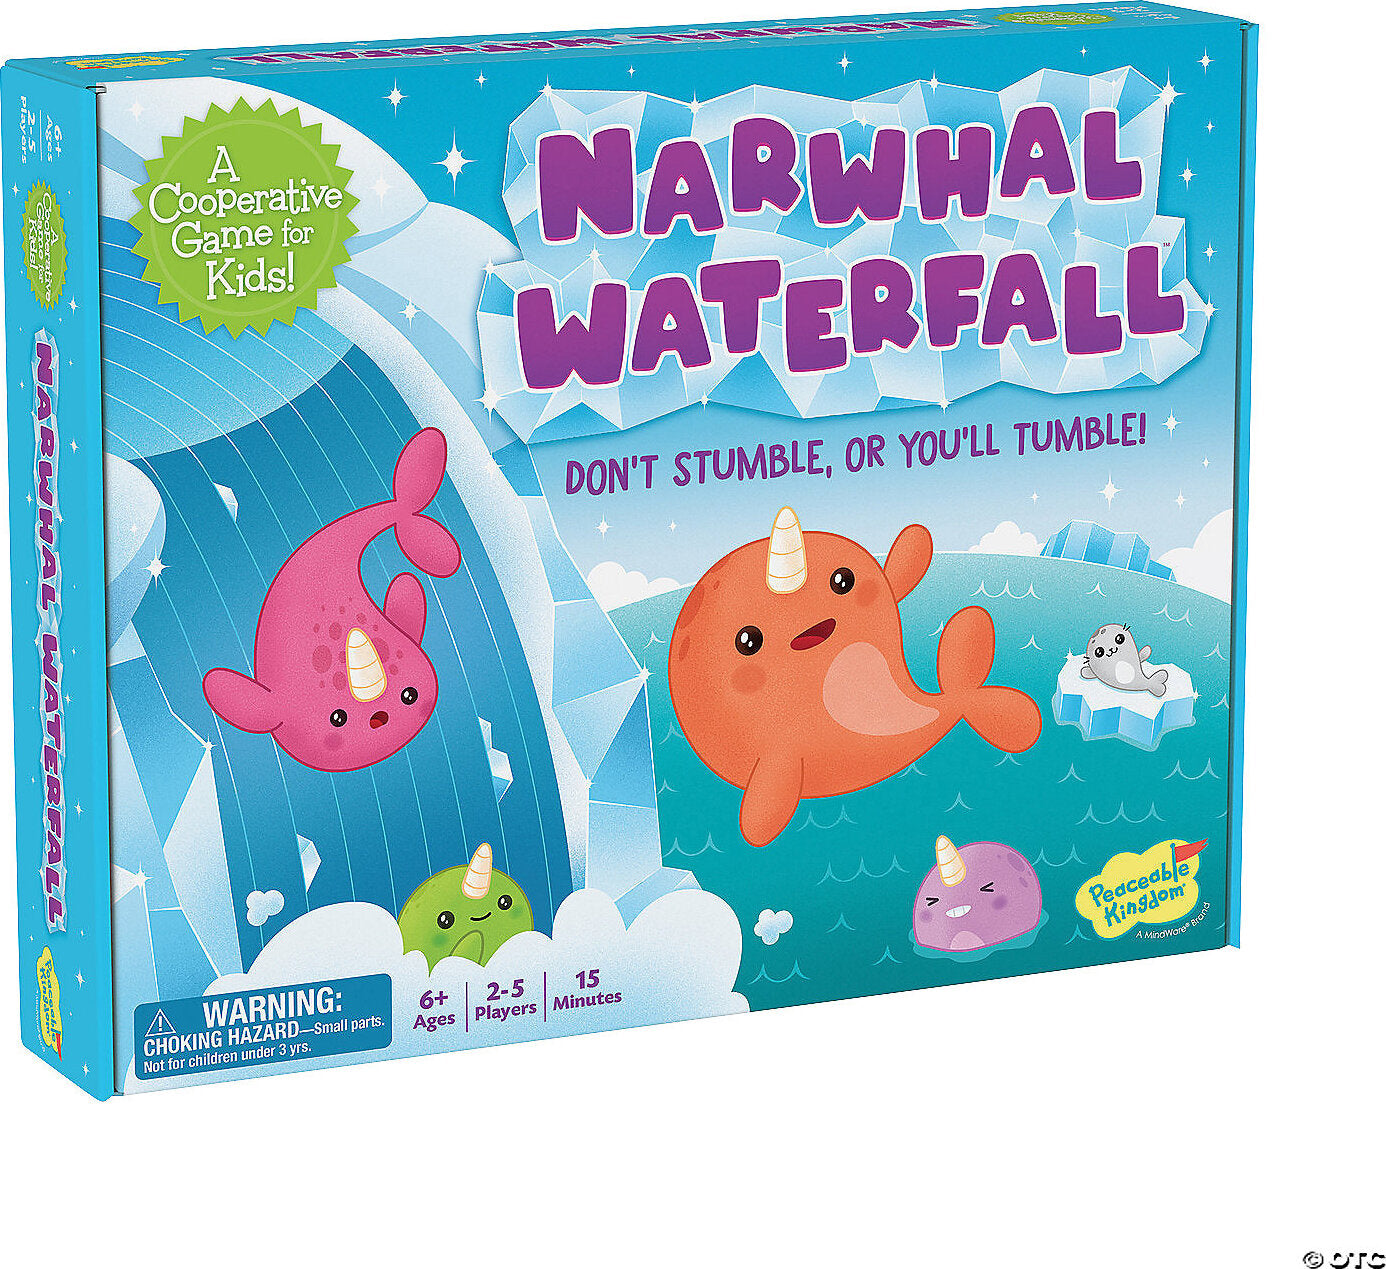 NARWHAL WATERFALL